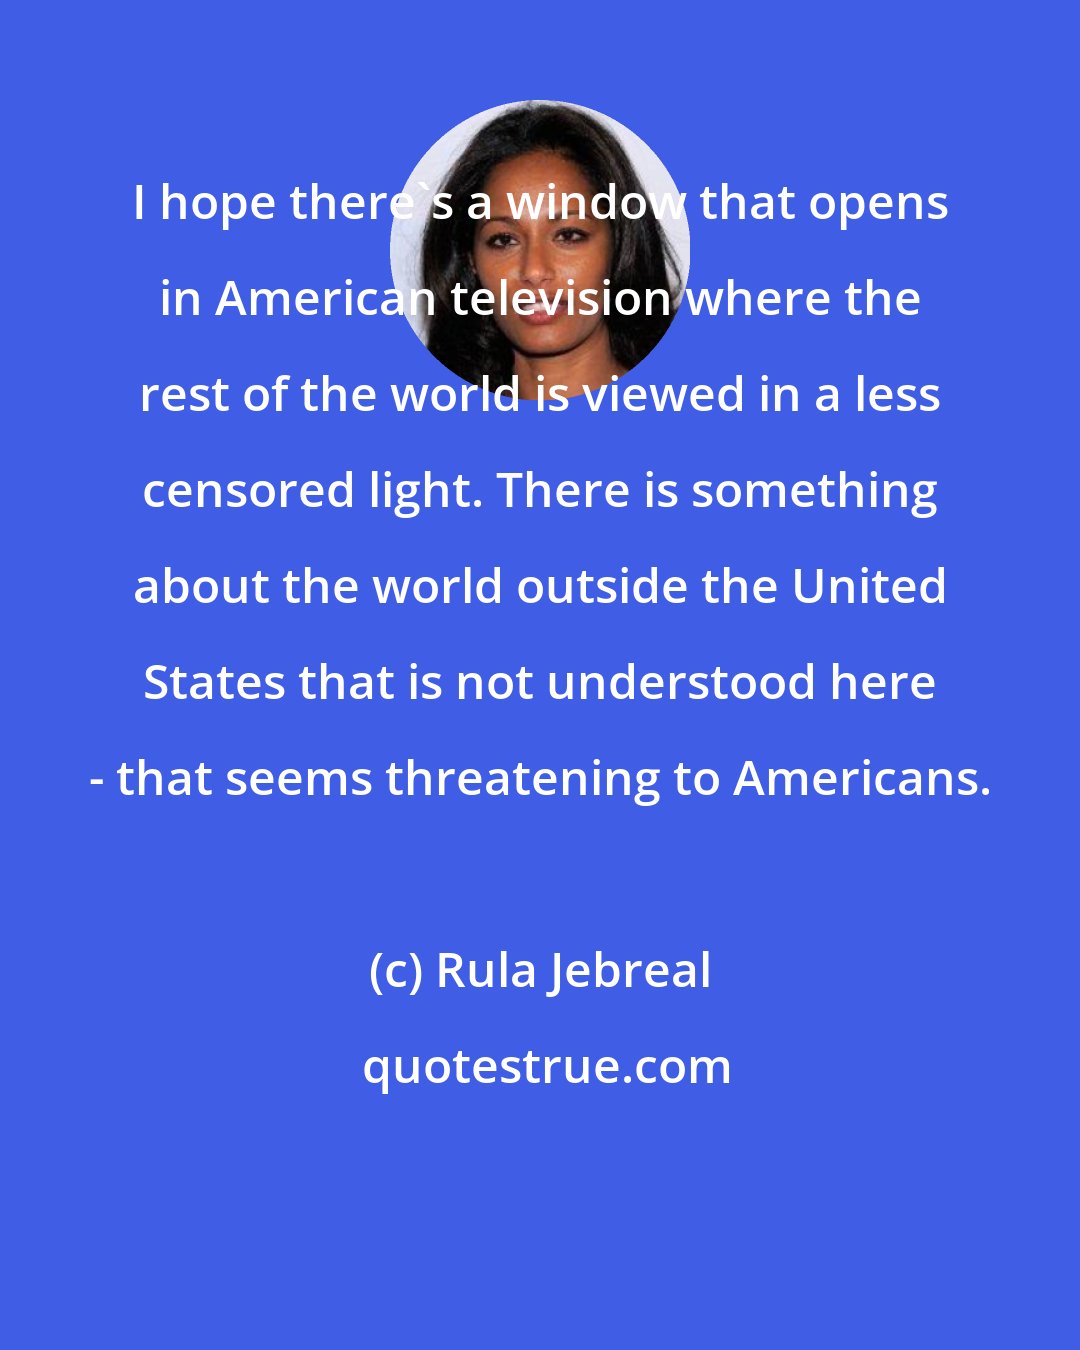 Rula Jebreal: I hope there's a window that opens in American television where the rest of the world is viewed in a less censored light. There is something about the world outside the United States that is not understood here - that seems threatening to Americans.